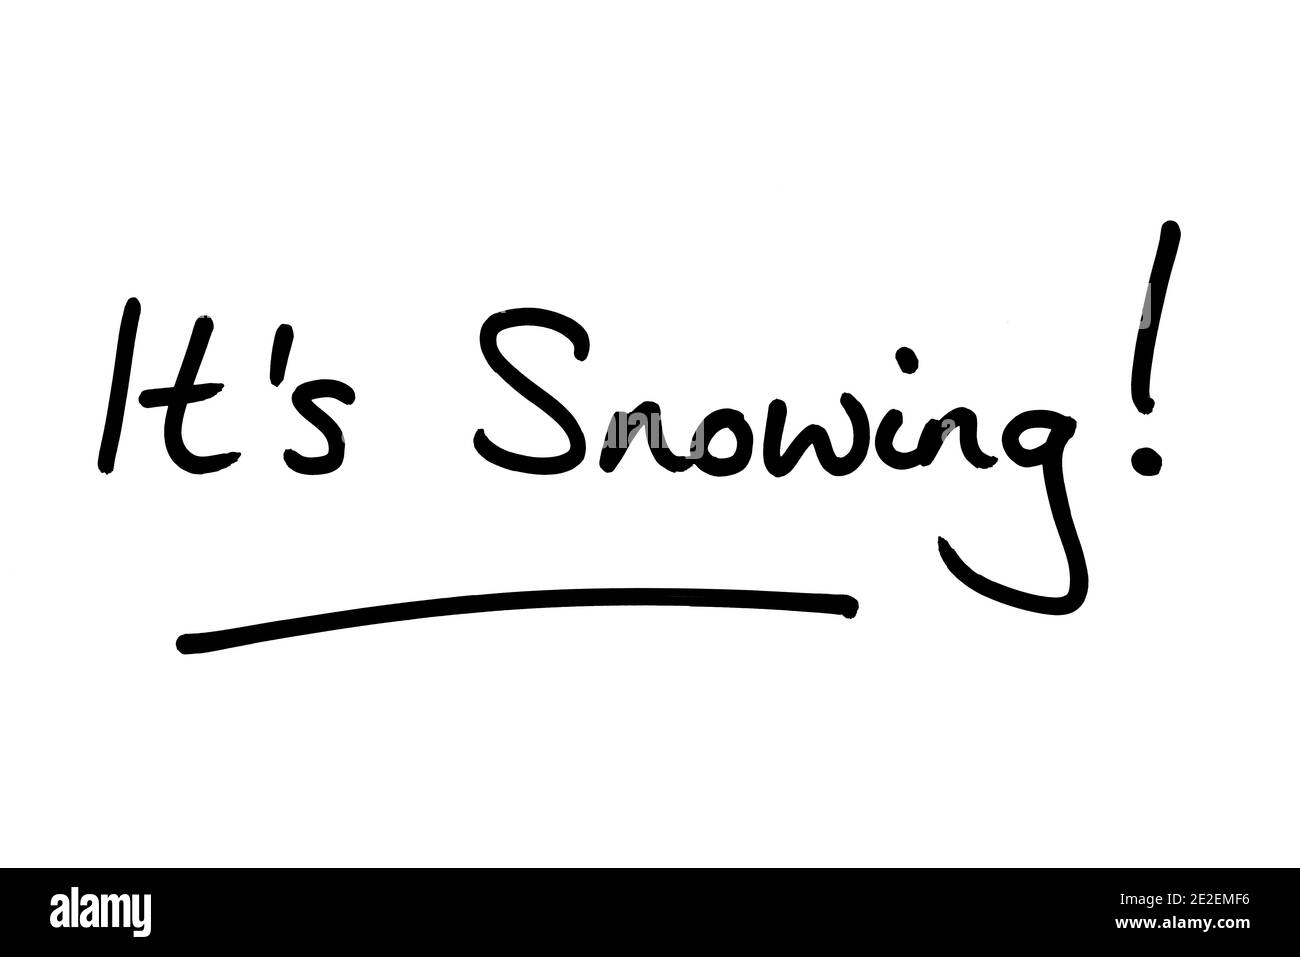 Its Snowing! handwritten on a white background. Stock Photo